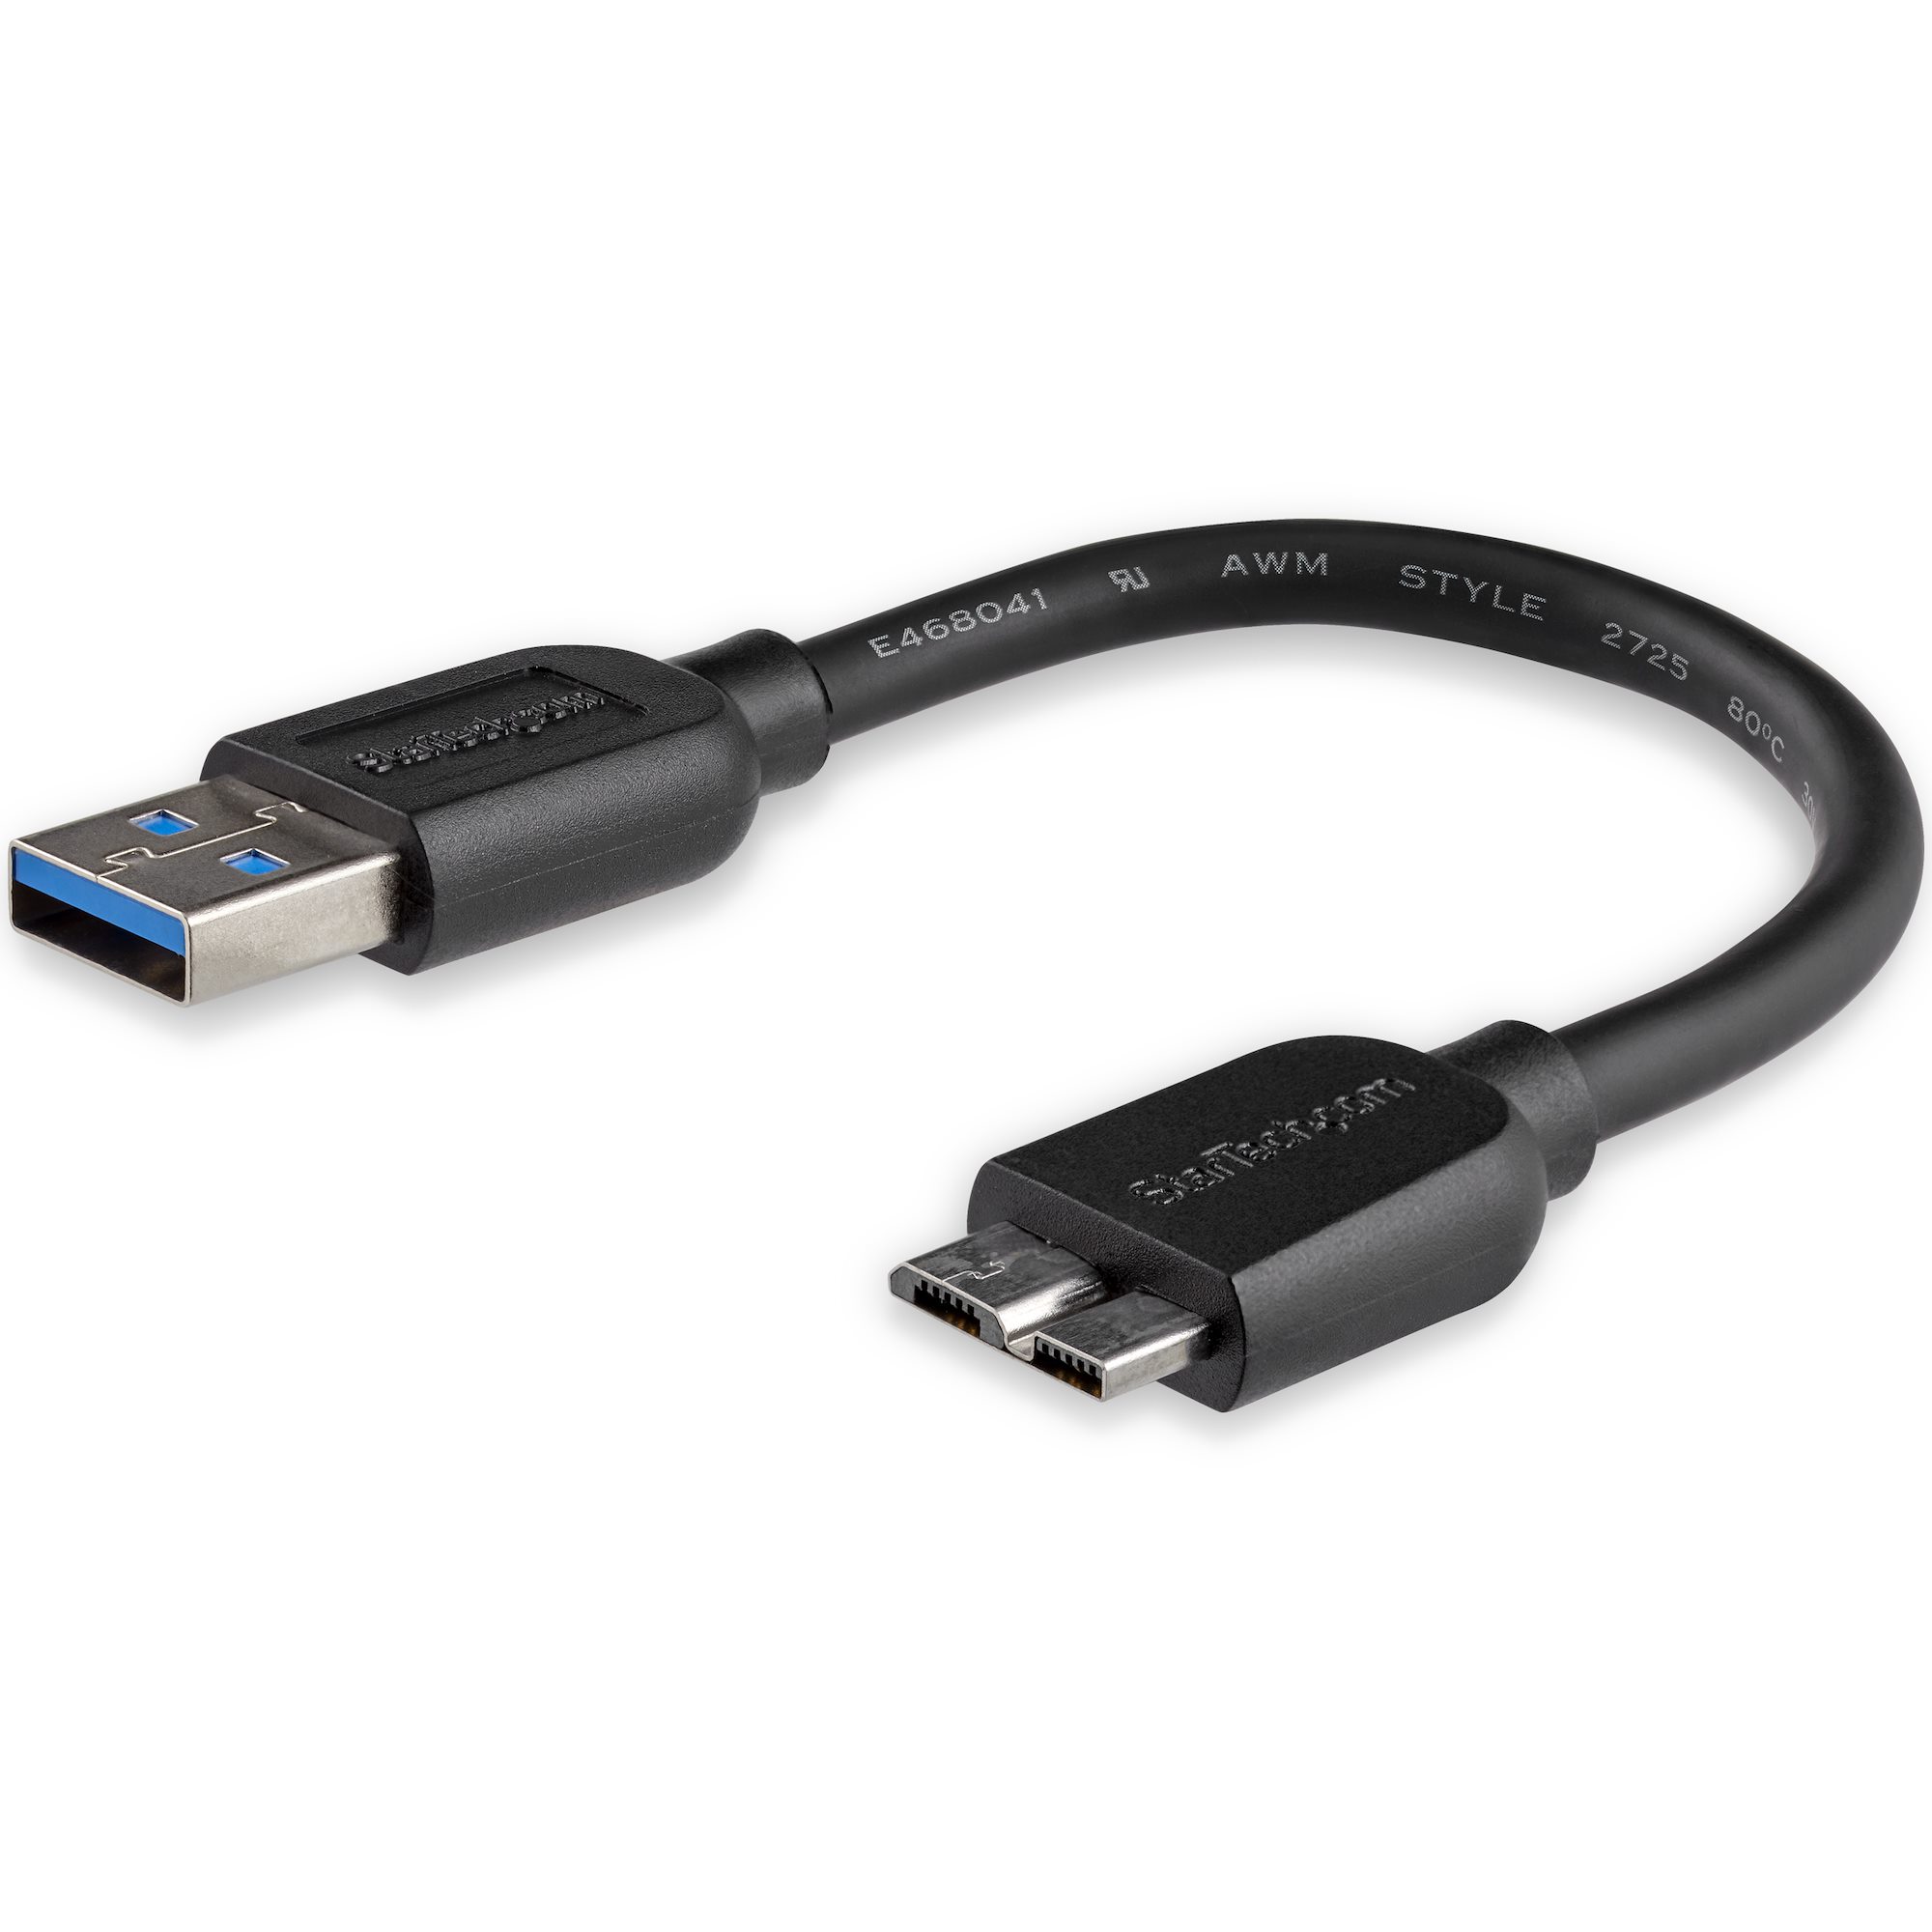 immunisering fly Angreb 15cm 6in Slim USB 3.0 Micro B Cable - USB 3.0 Cables | StarTech.com